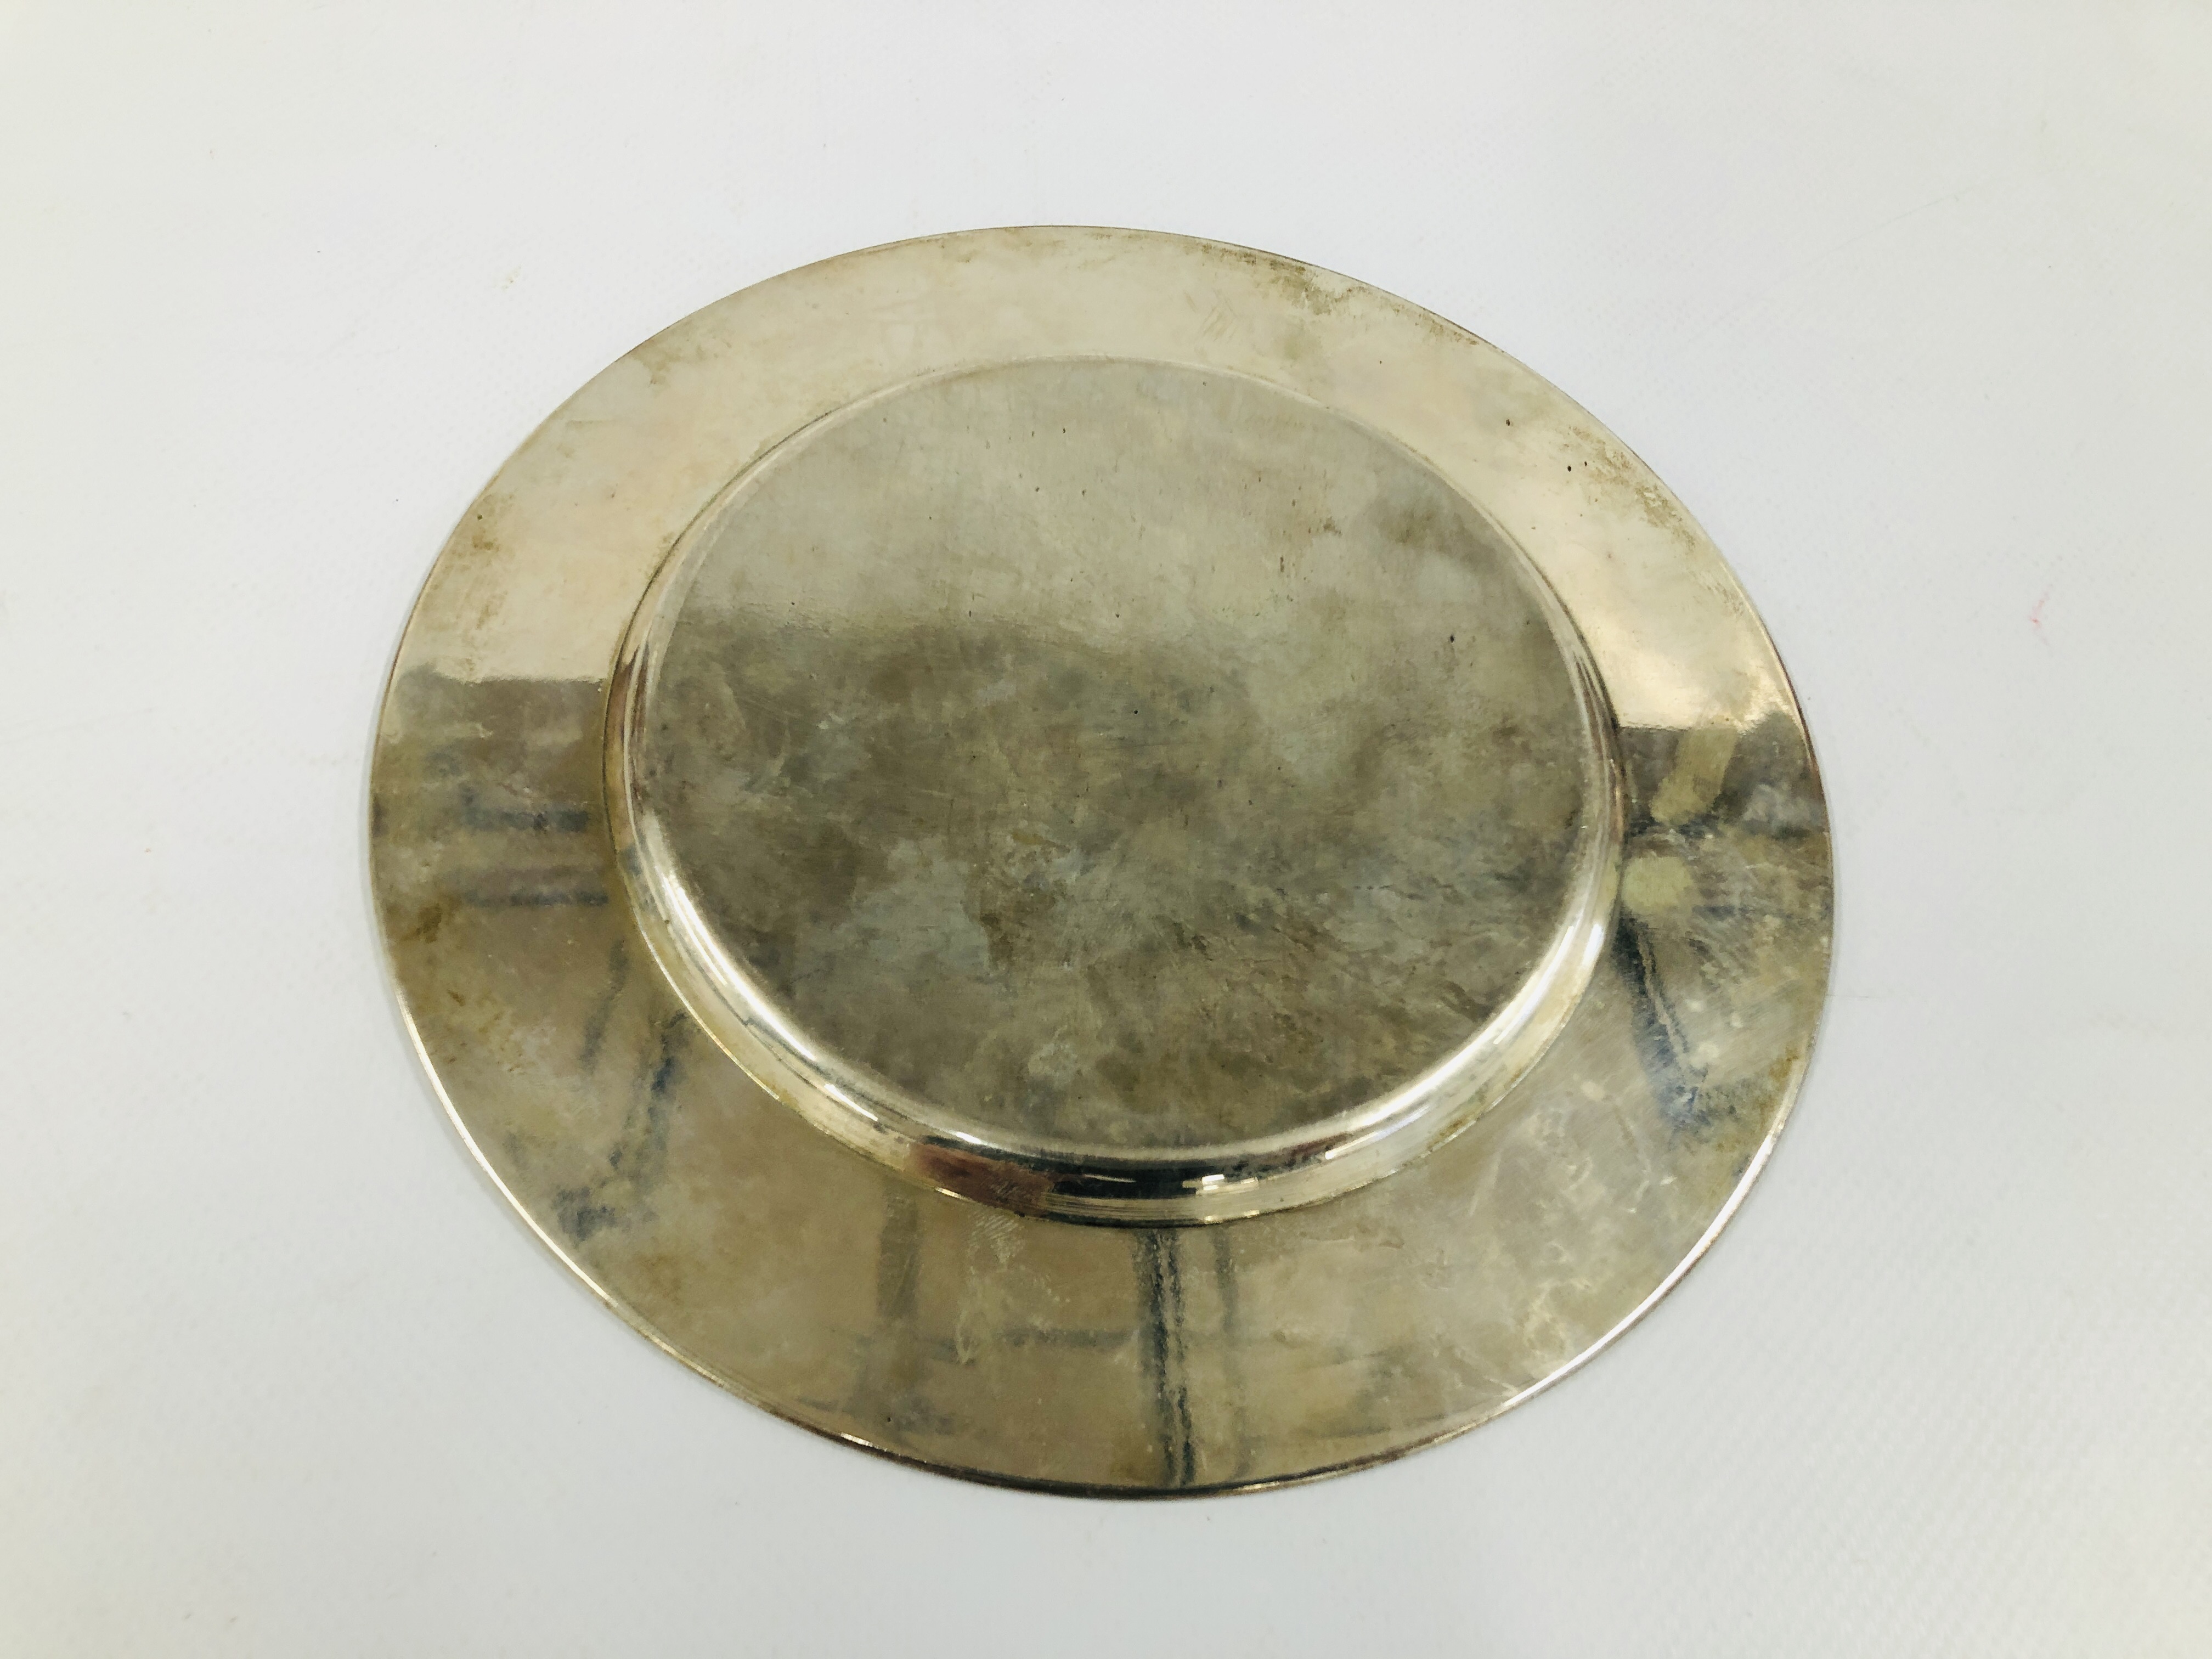 A CONTINENTAL SILVER CIRCULAR PRESENTATION PLATE, STAMPED 800, DIA. 19CM. - Image 8 of 9